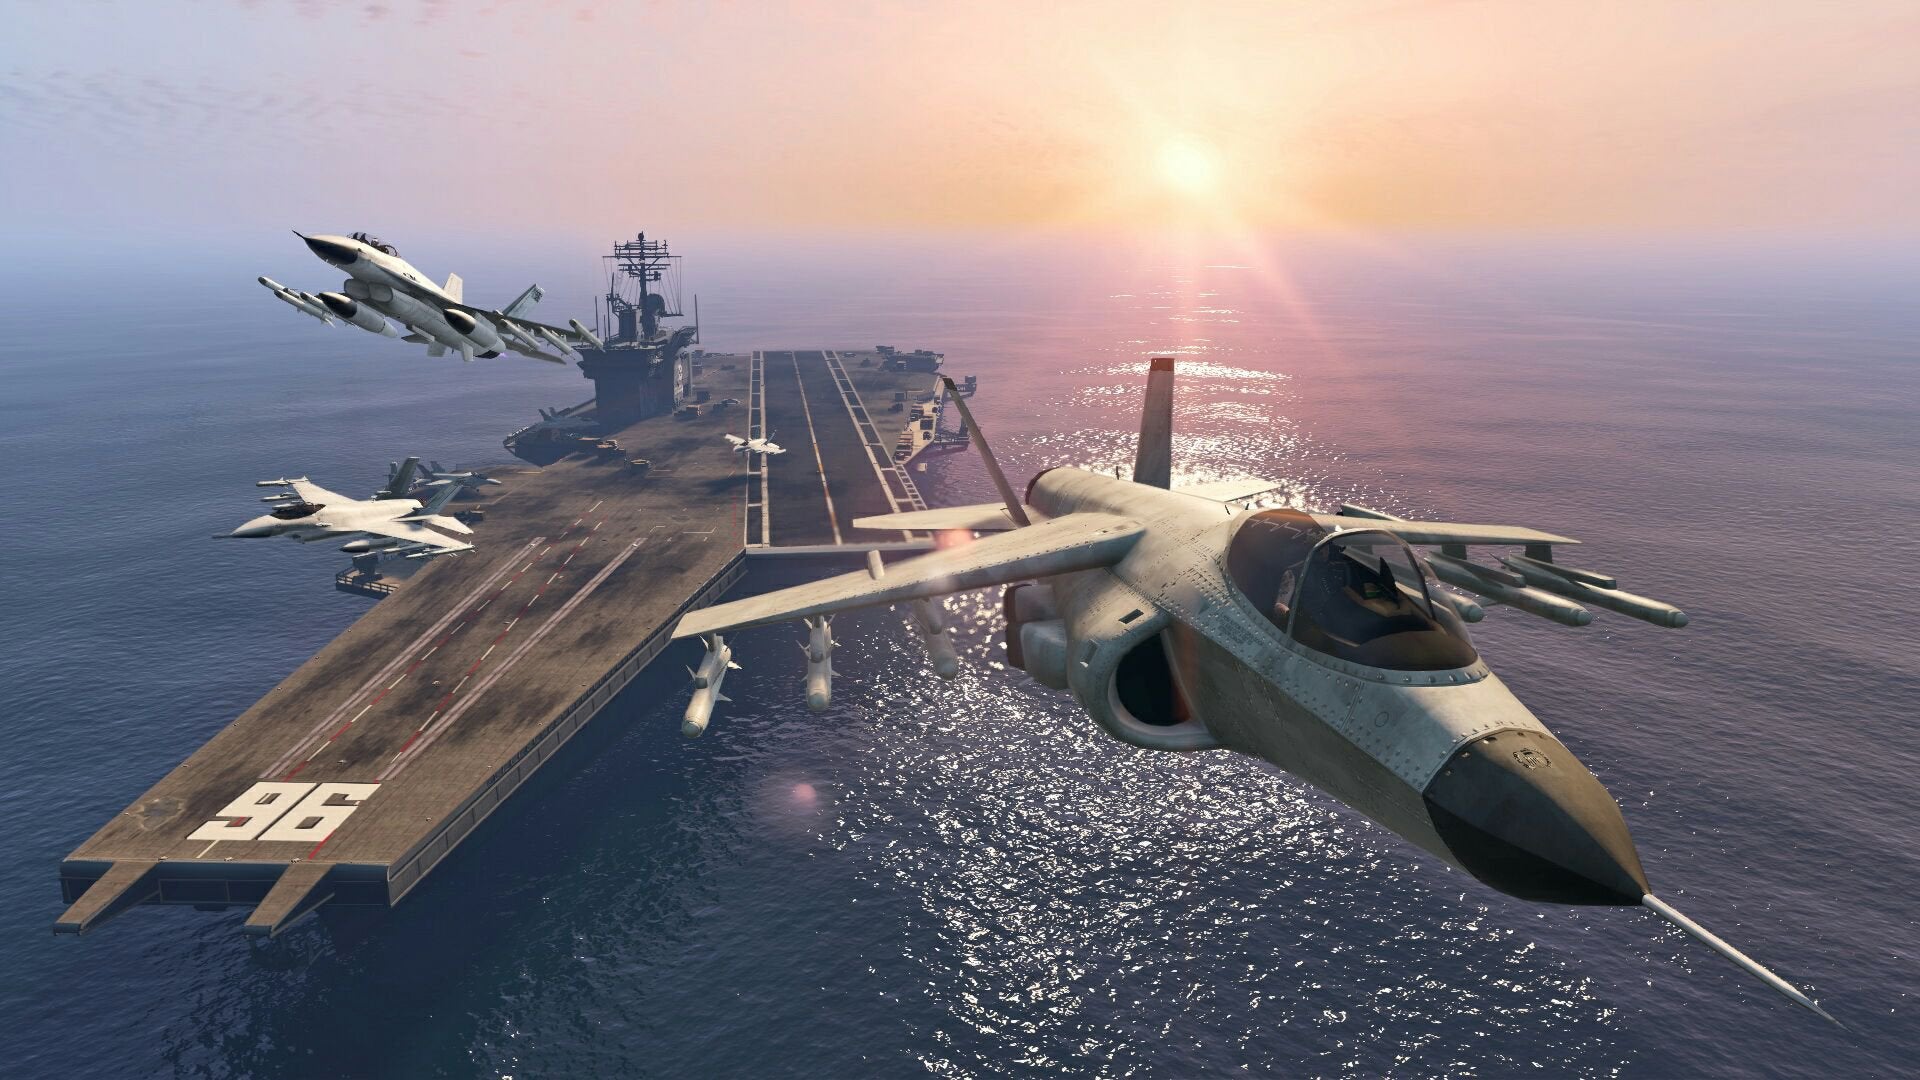 Our First Look At The Hydra Jet Ing With Heists Update